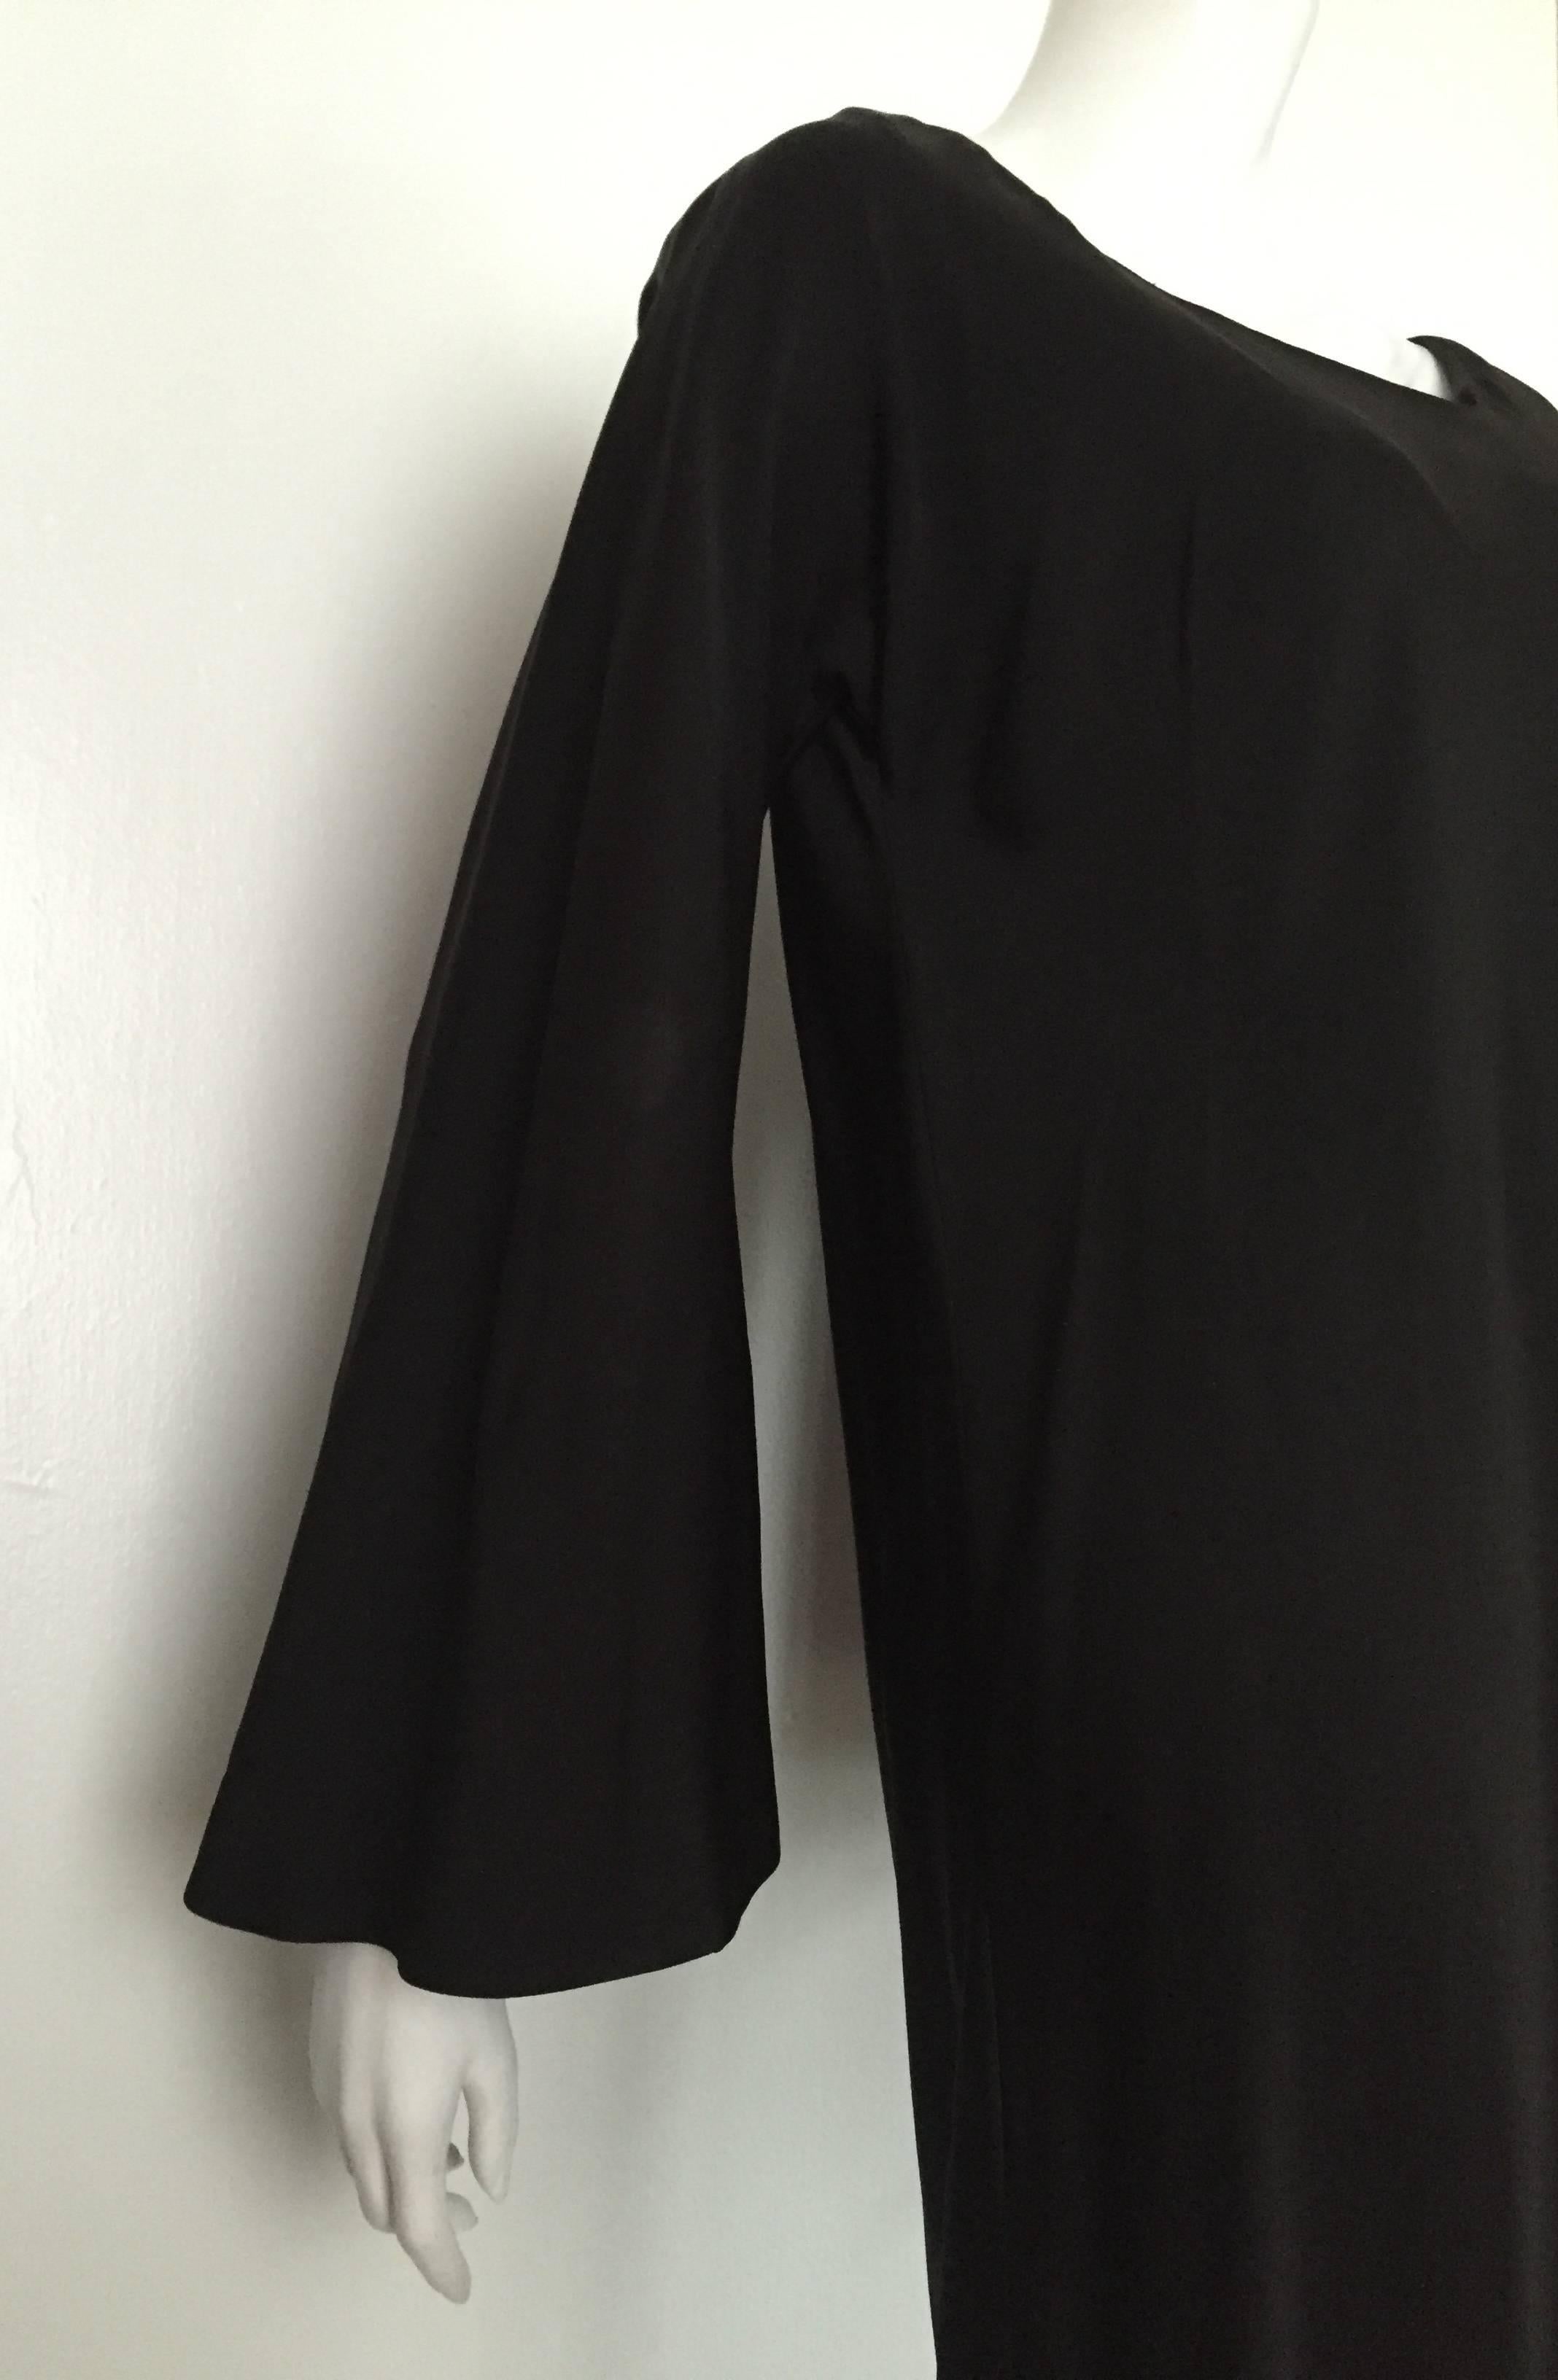 Pauline Trigere 1980s black silk evening dress with bell sleeves will fit a size 12 / 14 but please see the measurements below and properly measure your body so you will be 100% certain this vintage piece will fit you to perfection.
This treasure